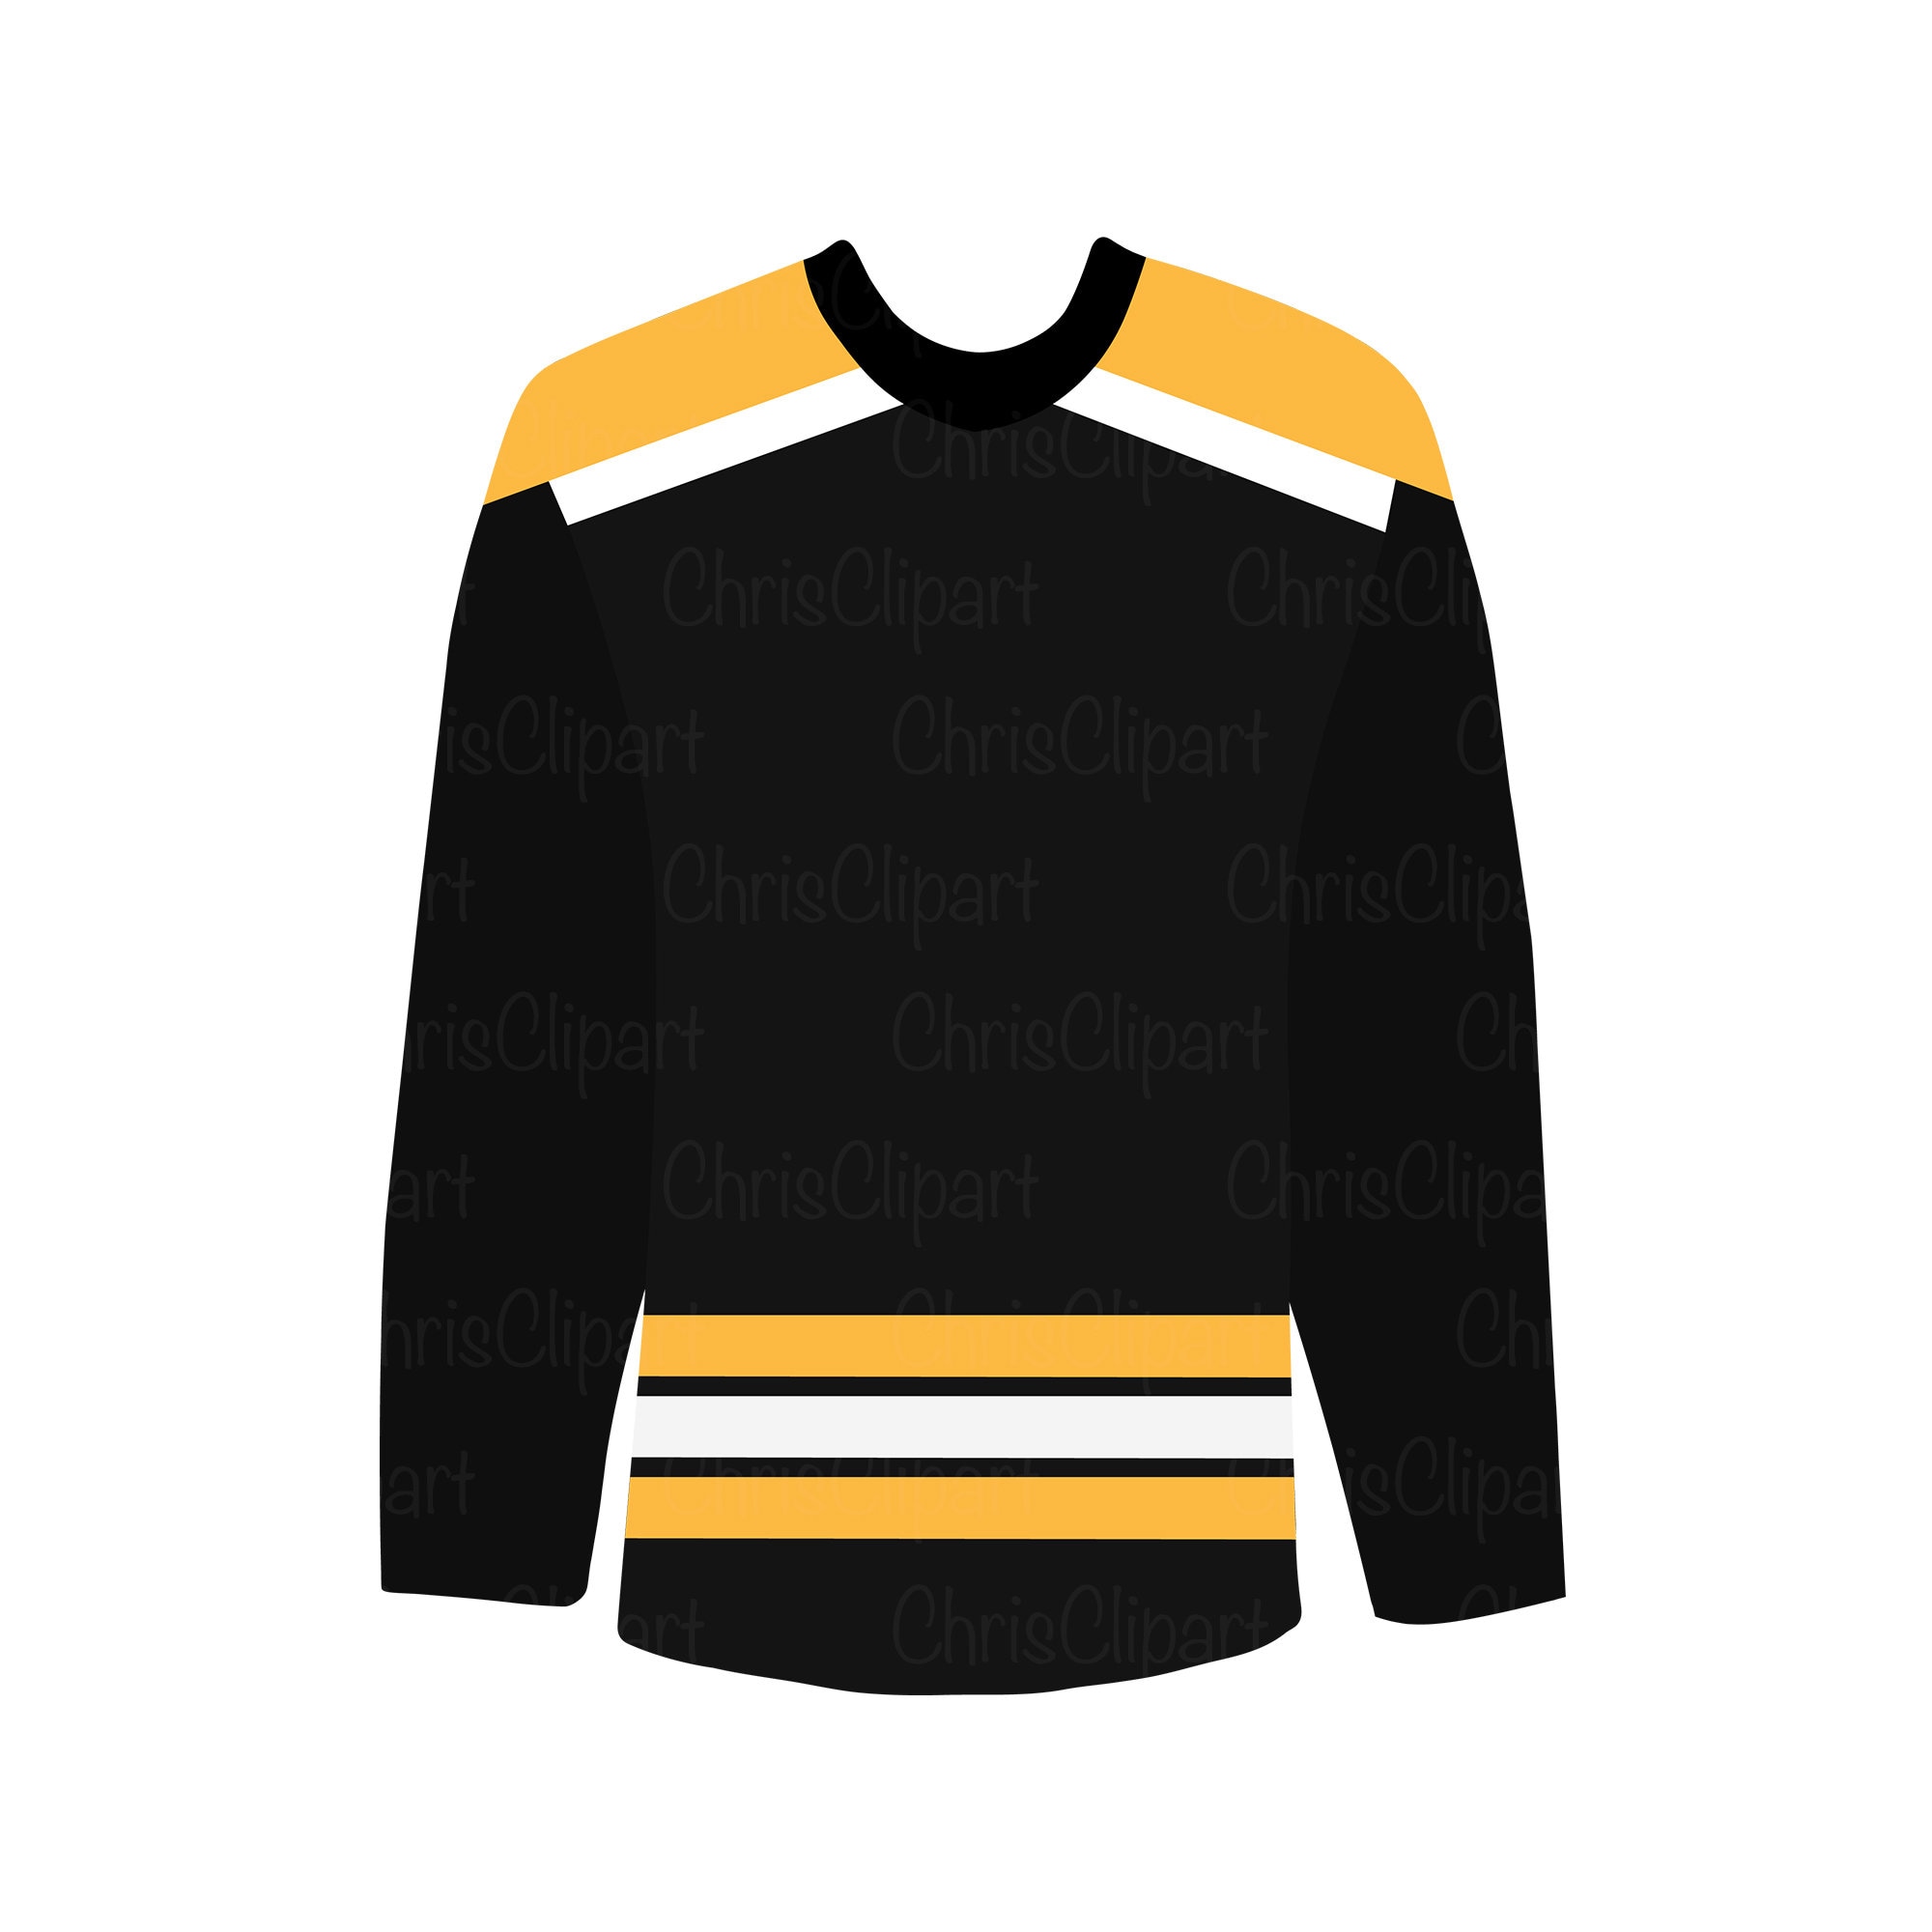 Men's Hockey Jersey - Free Download Images High Quality PNG, JPG